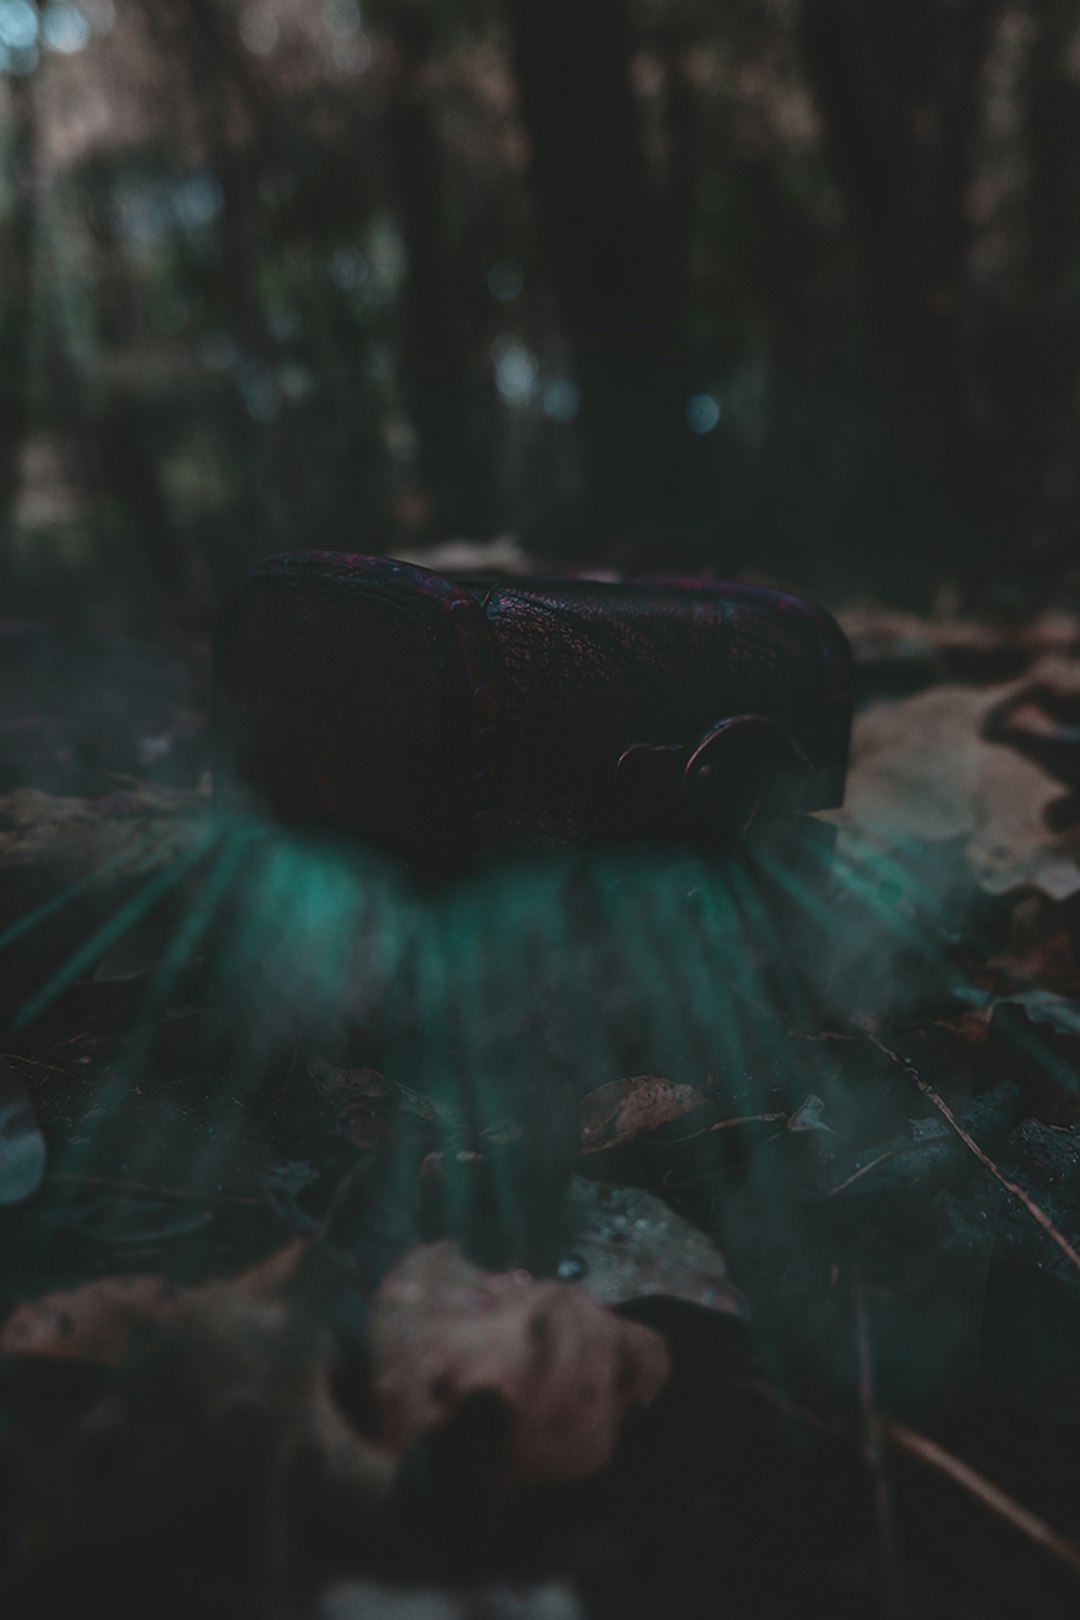 Mystery Box Pictures Download Free Images On Unsplash